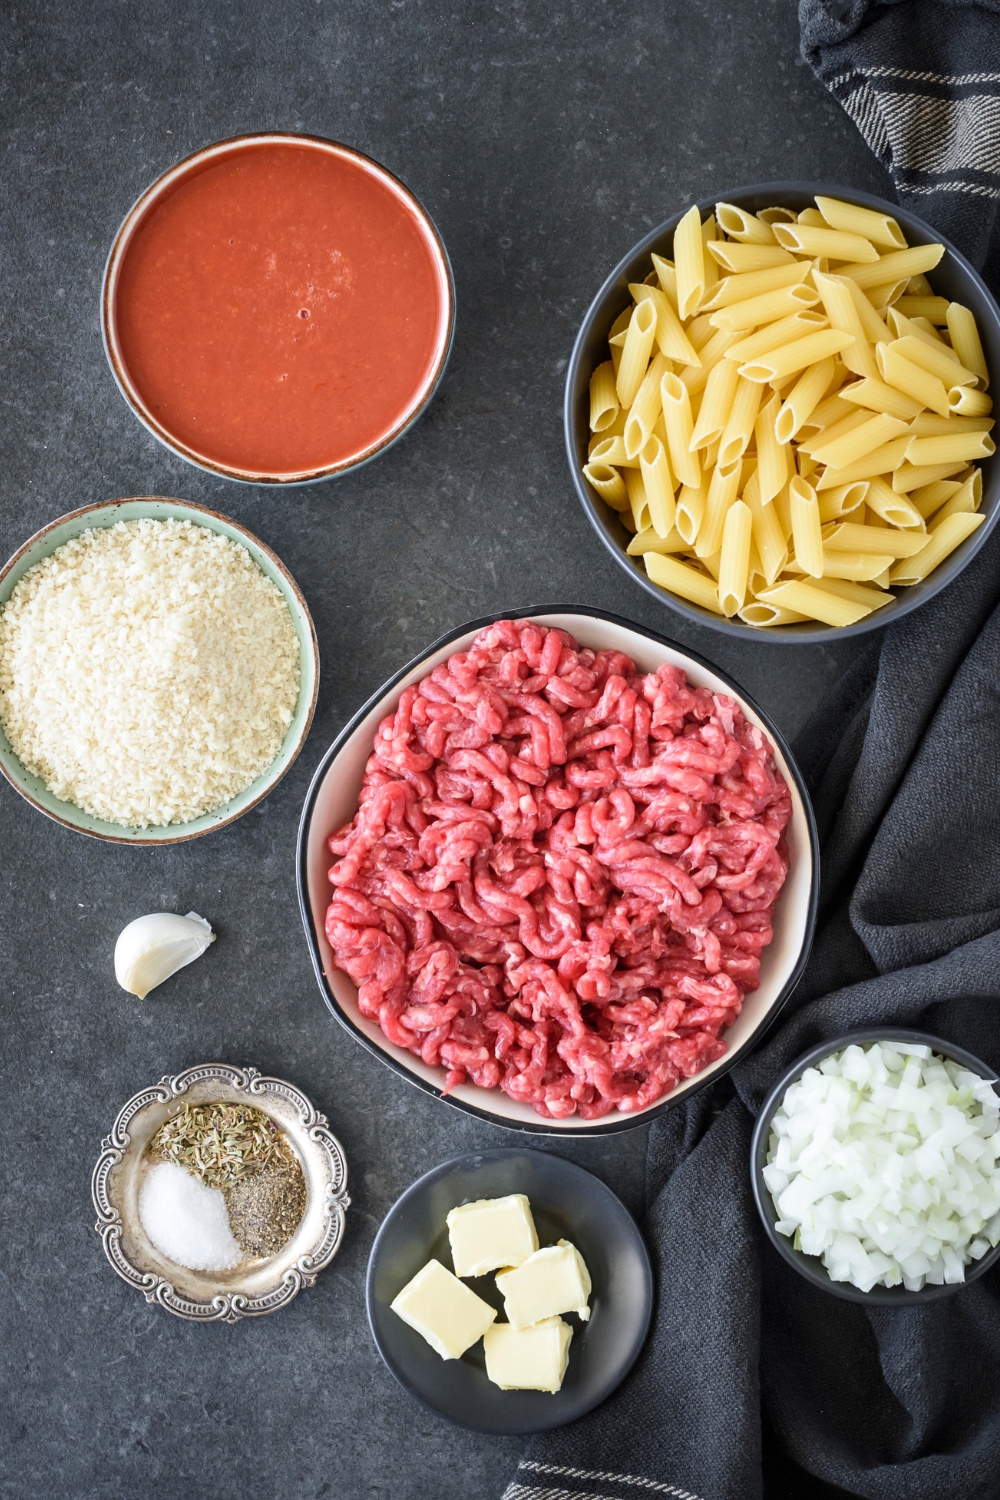 An assortment of ingredients including bowls of tomato sauce, dried pasta, raw ground beef, bread crumbs, diced onion, herbs, and a single garlic clove.